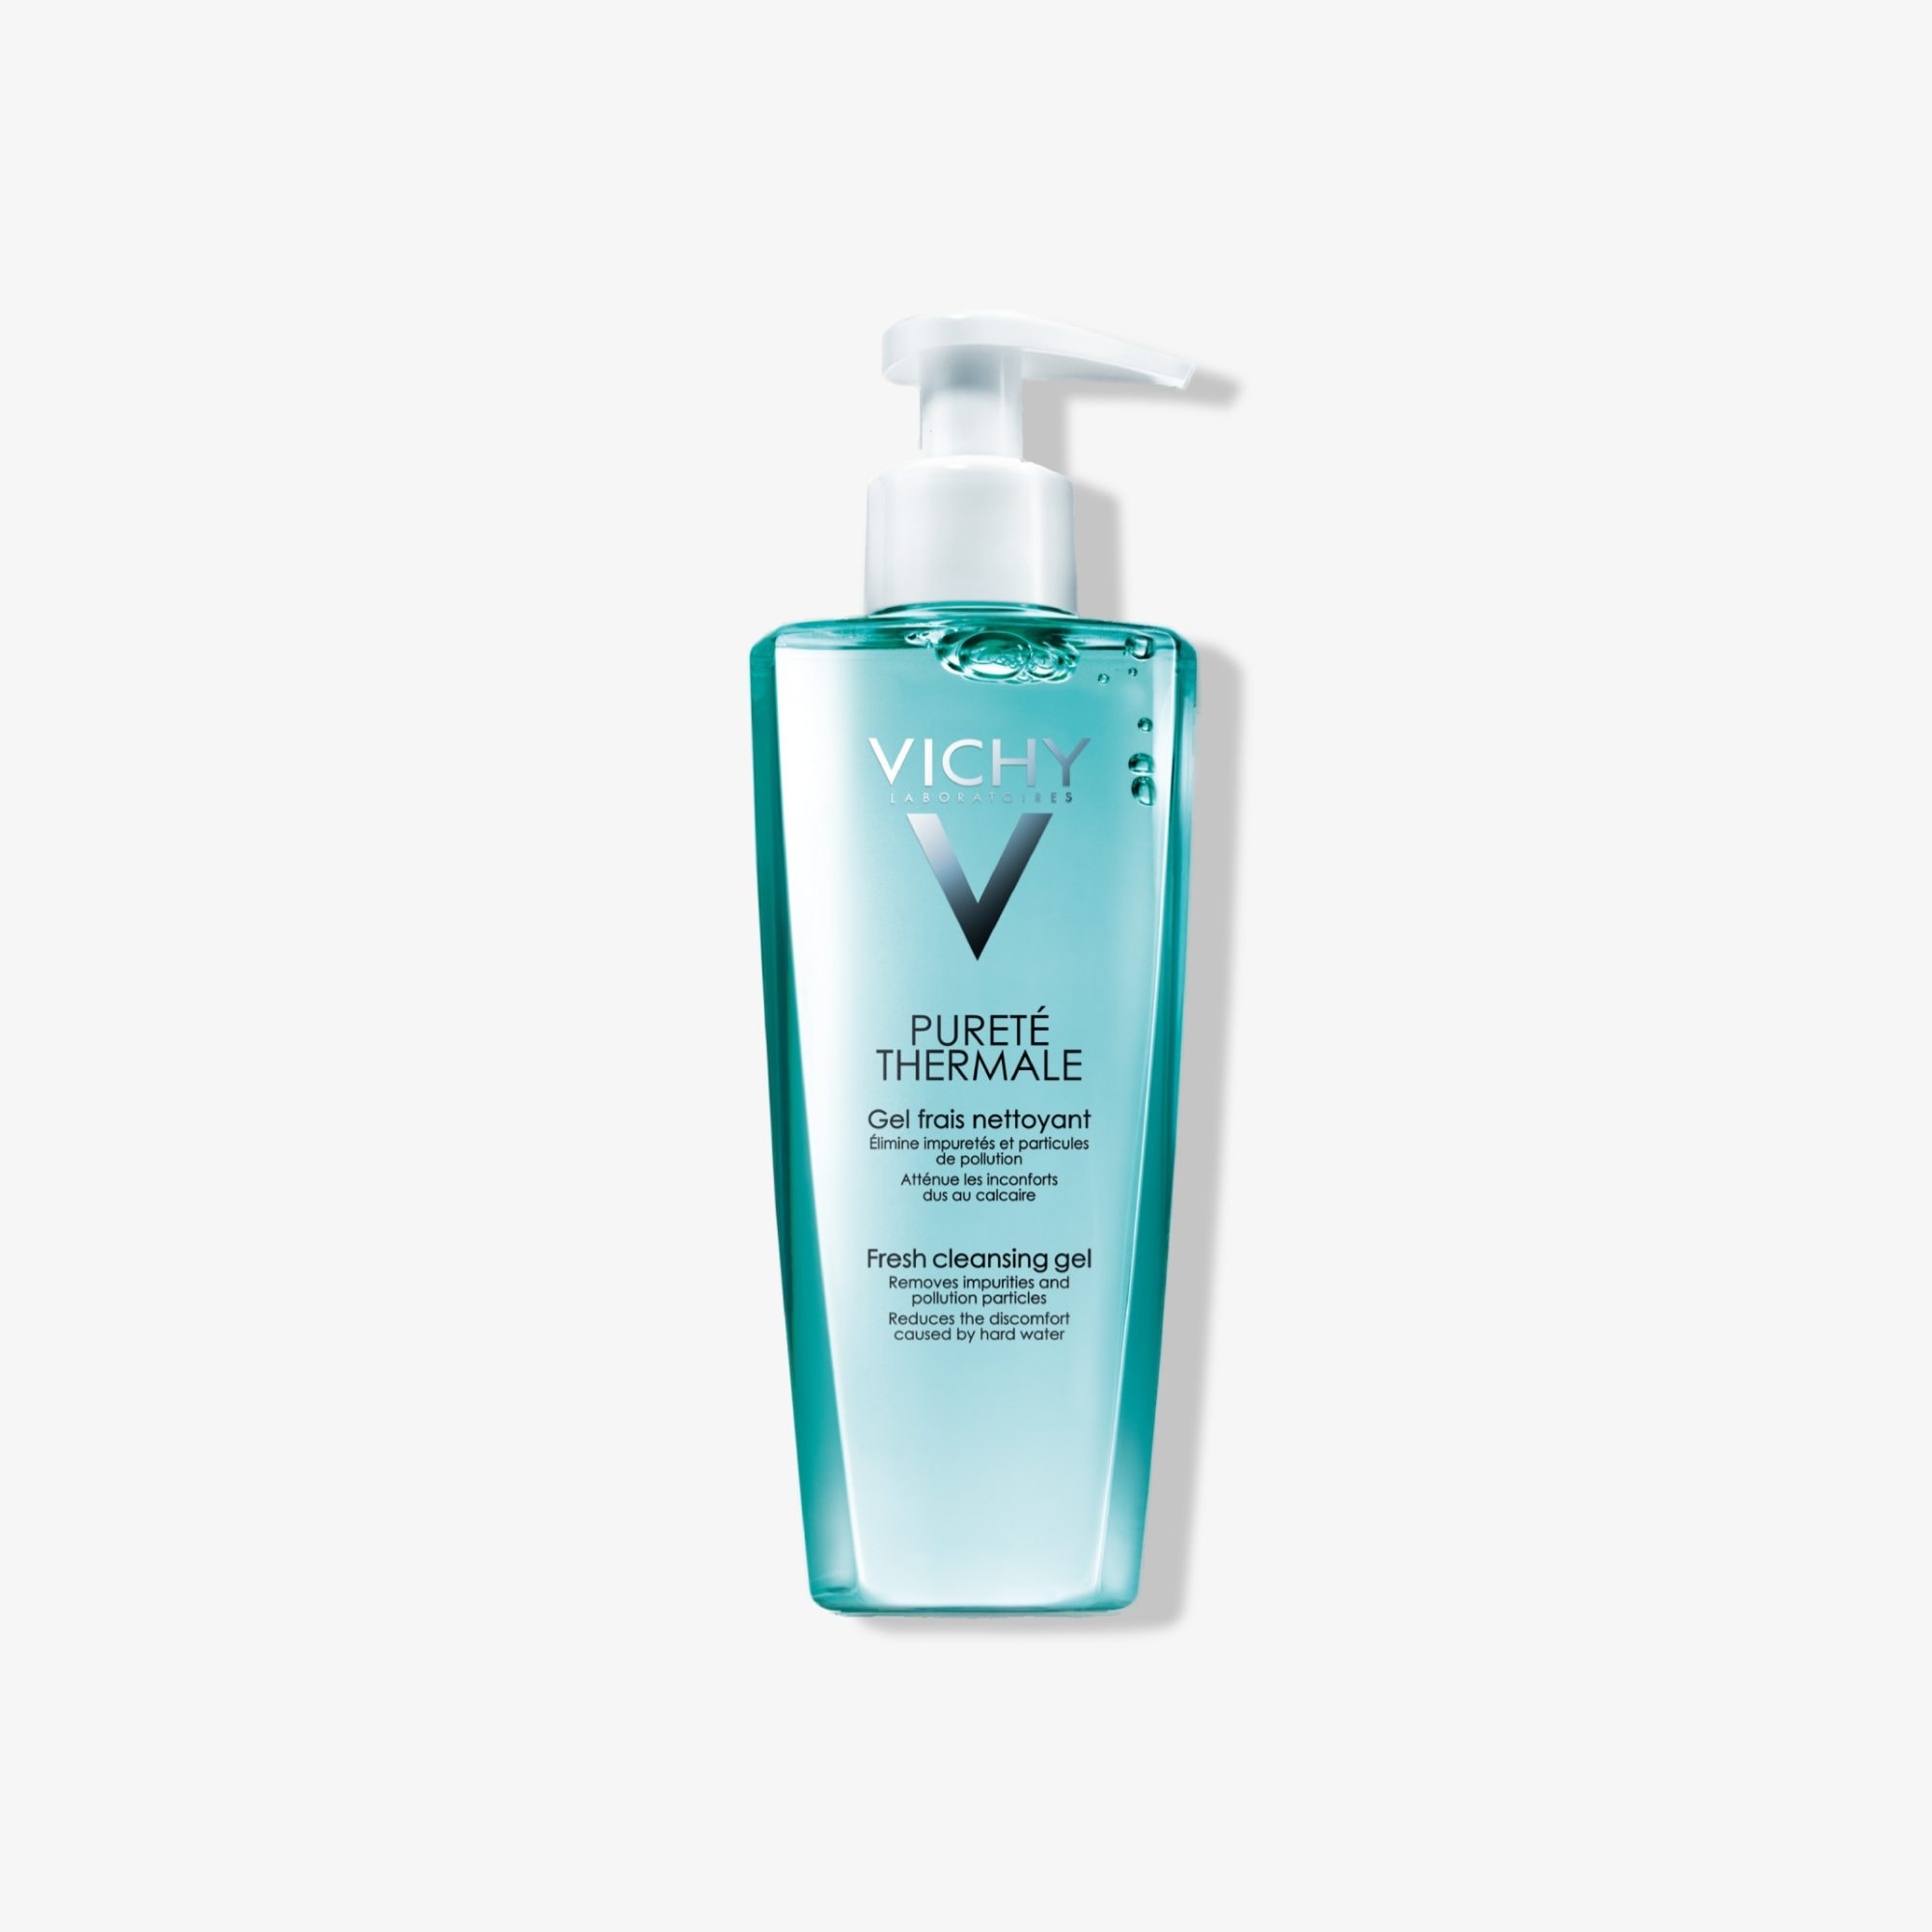 PURETE-THERMALE-FRESH-CLEANSING-GEL